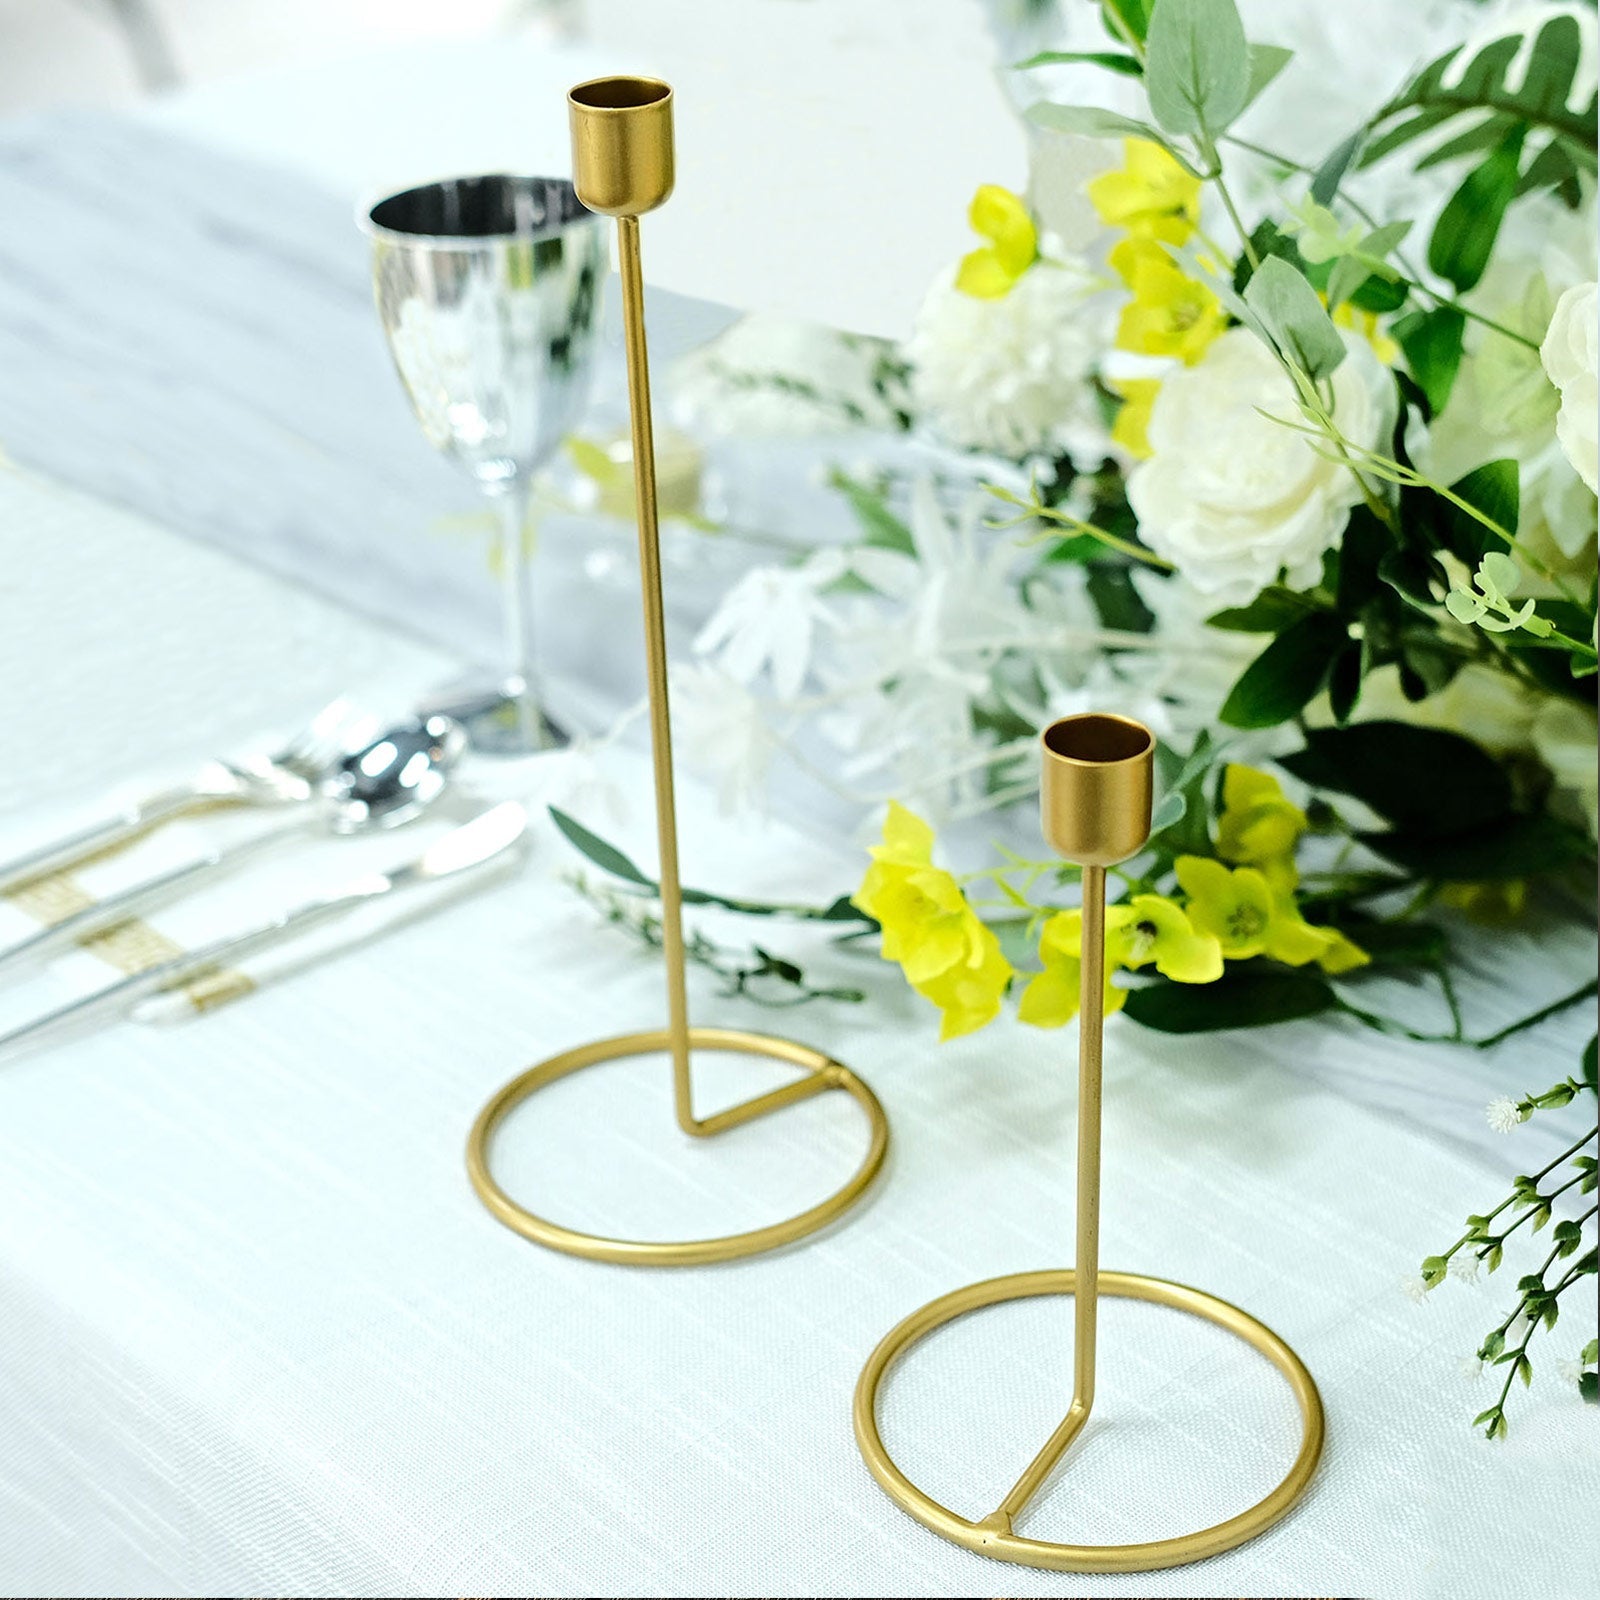 2 Metal Geometric Taper Candle Holders with Ring Base - Gold